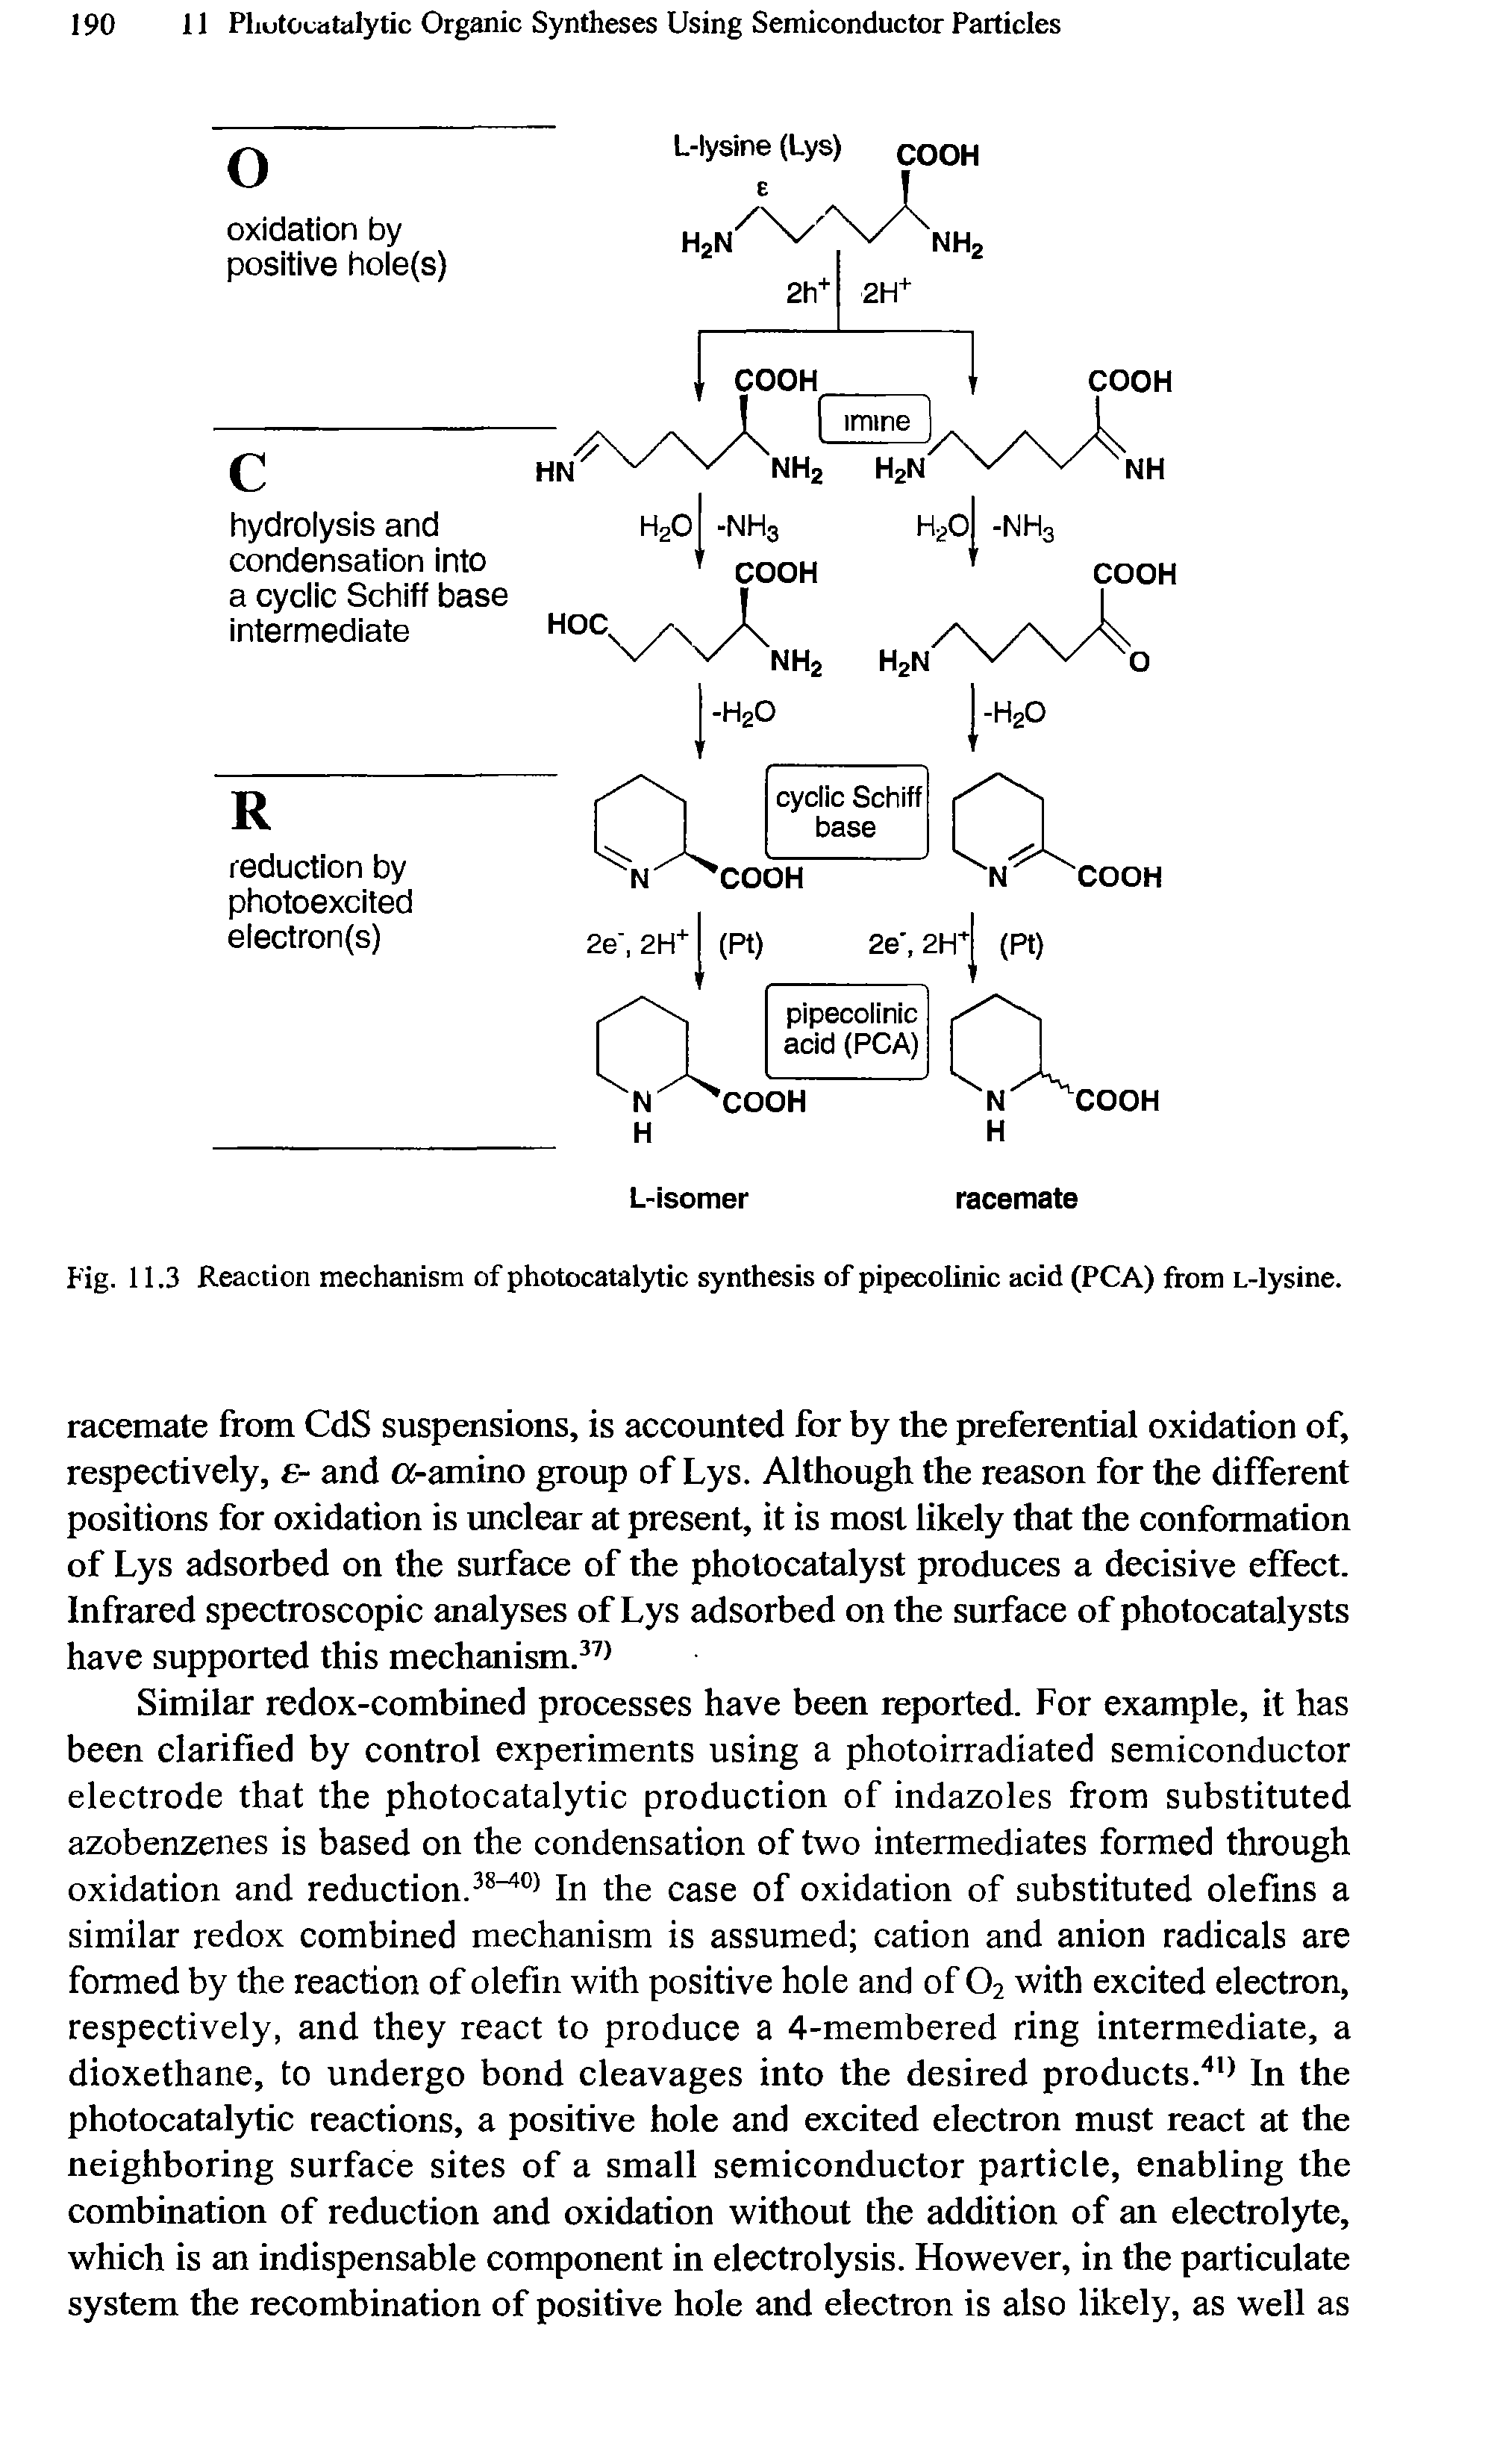 Fig. 11.3 Reaction mechanism of photocatalytic synthesis of pipecolinic acid (PCA) from L-lysine.